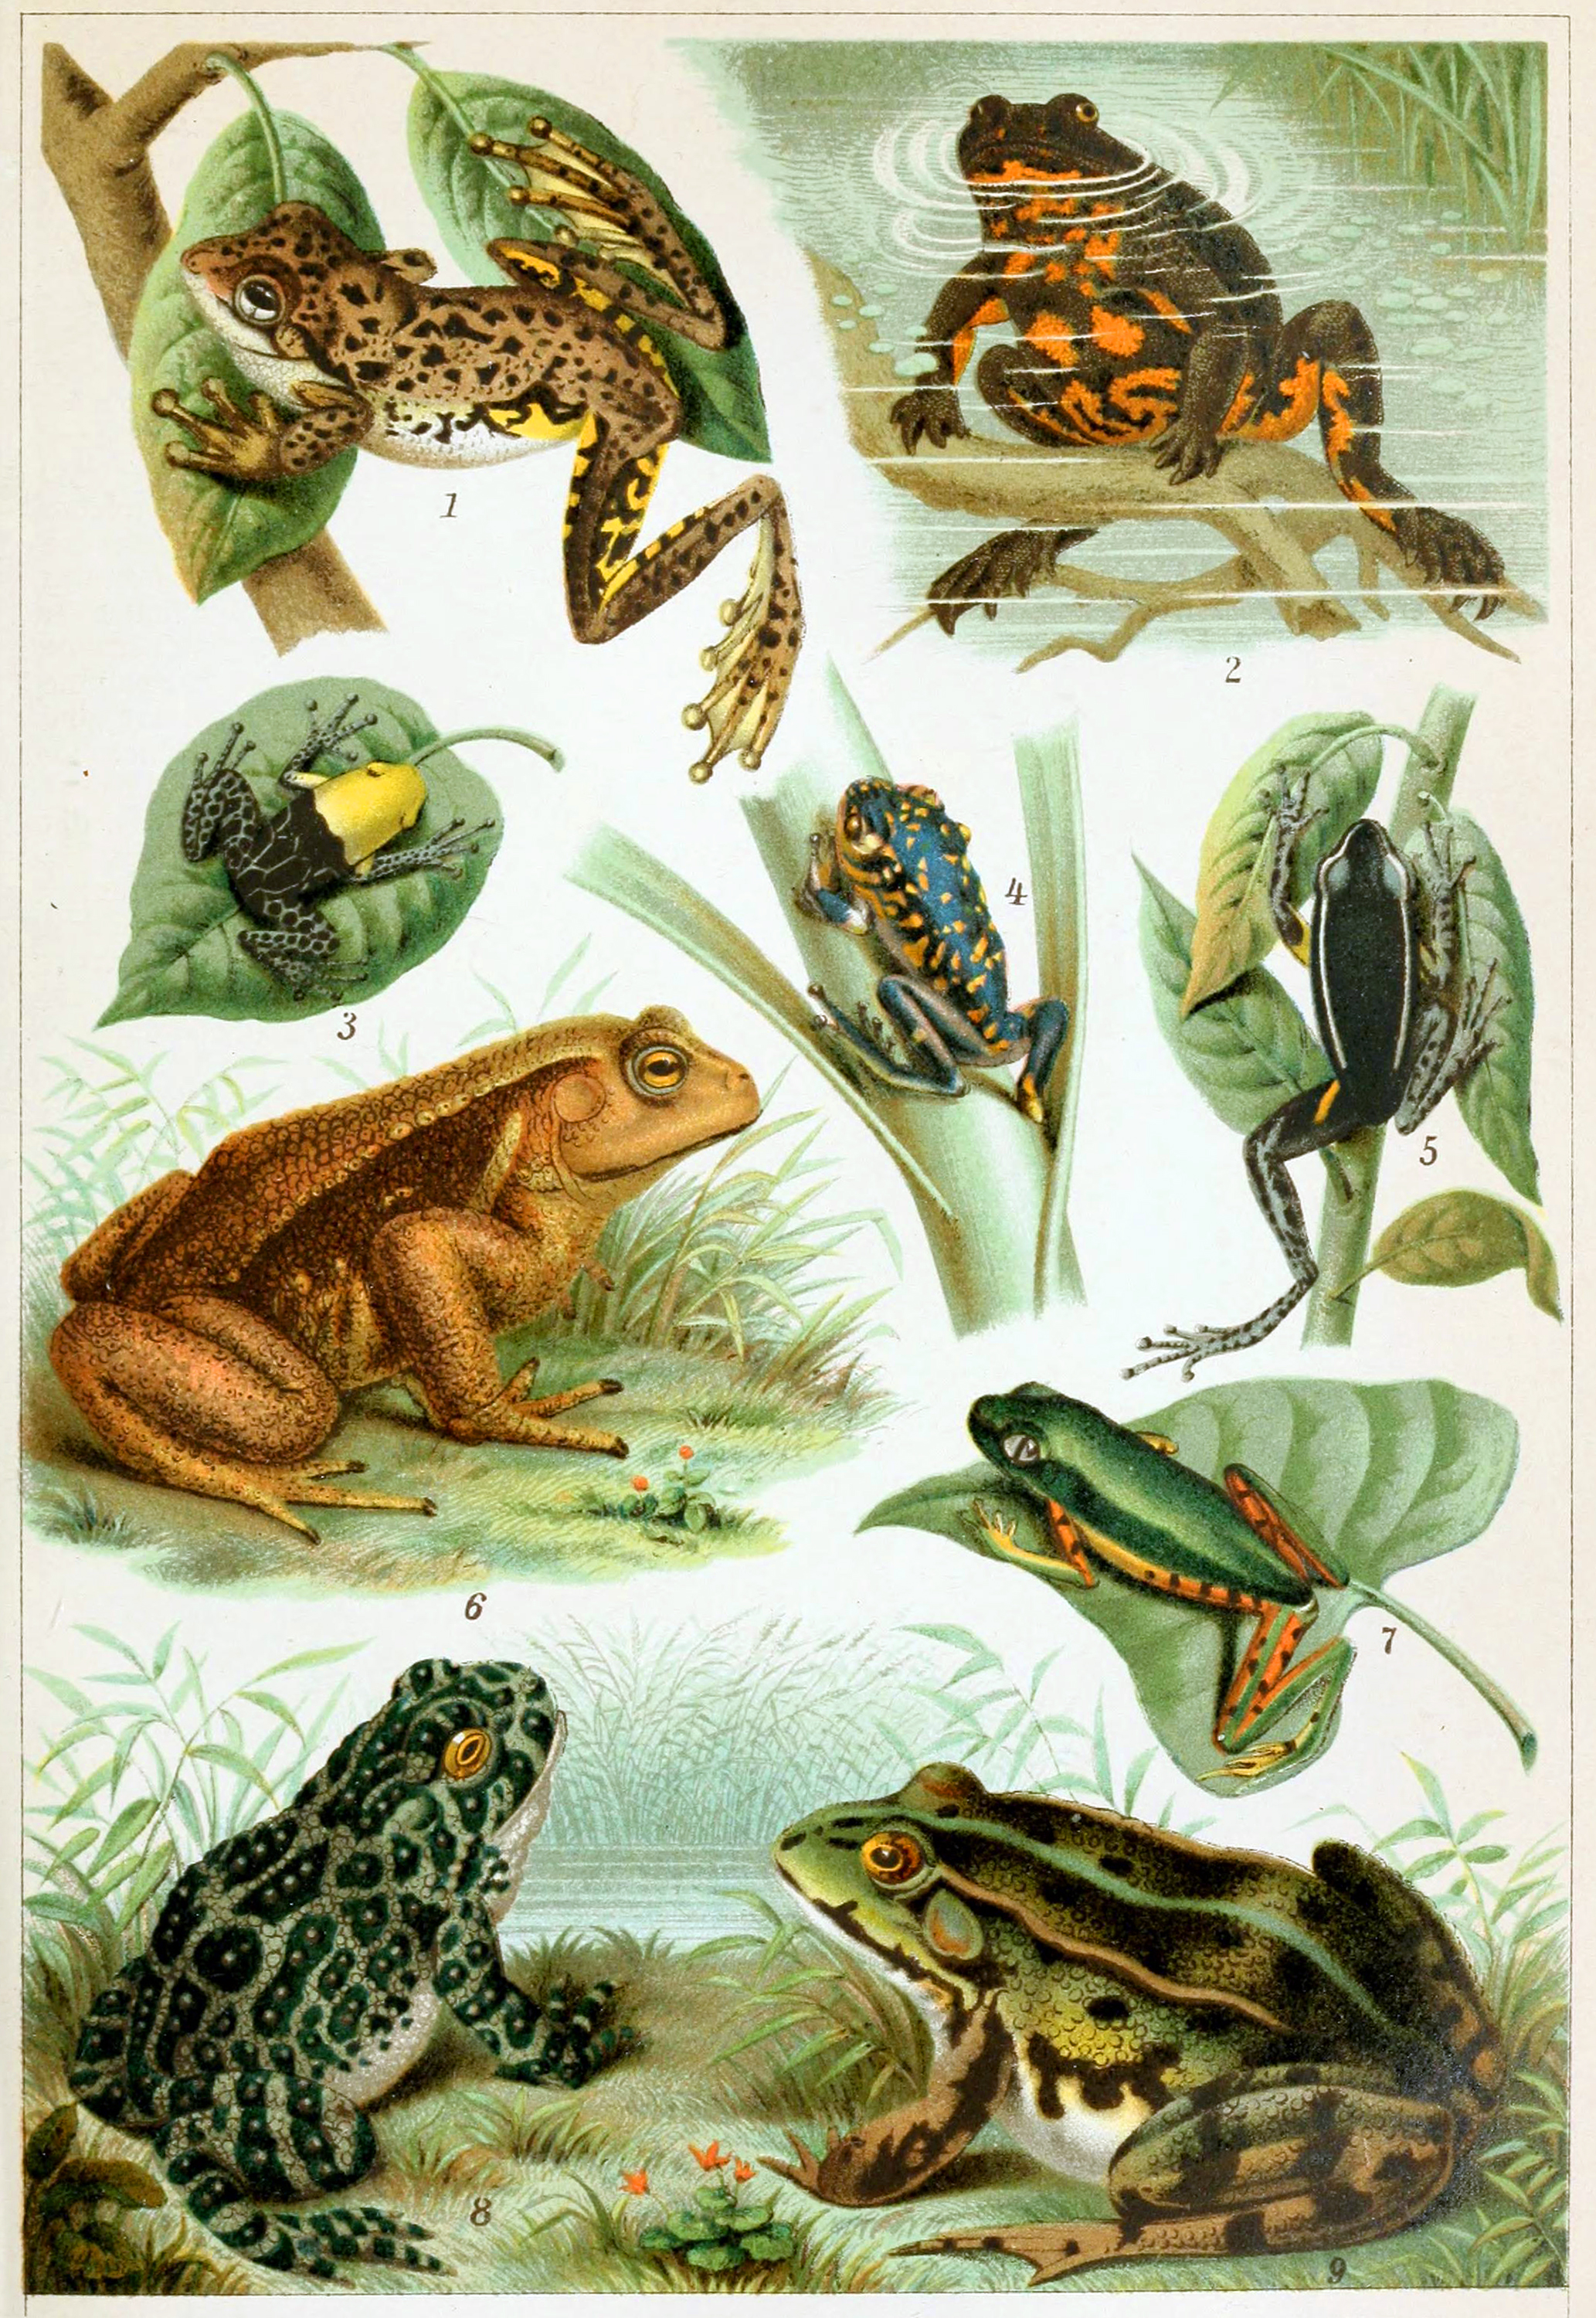 What species is frogs?